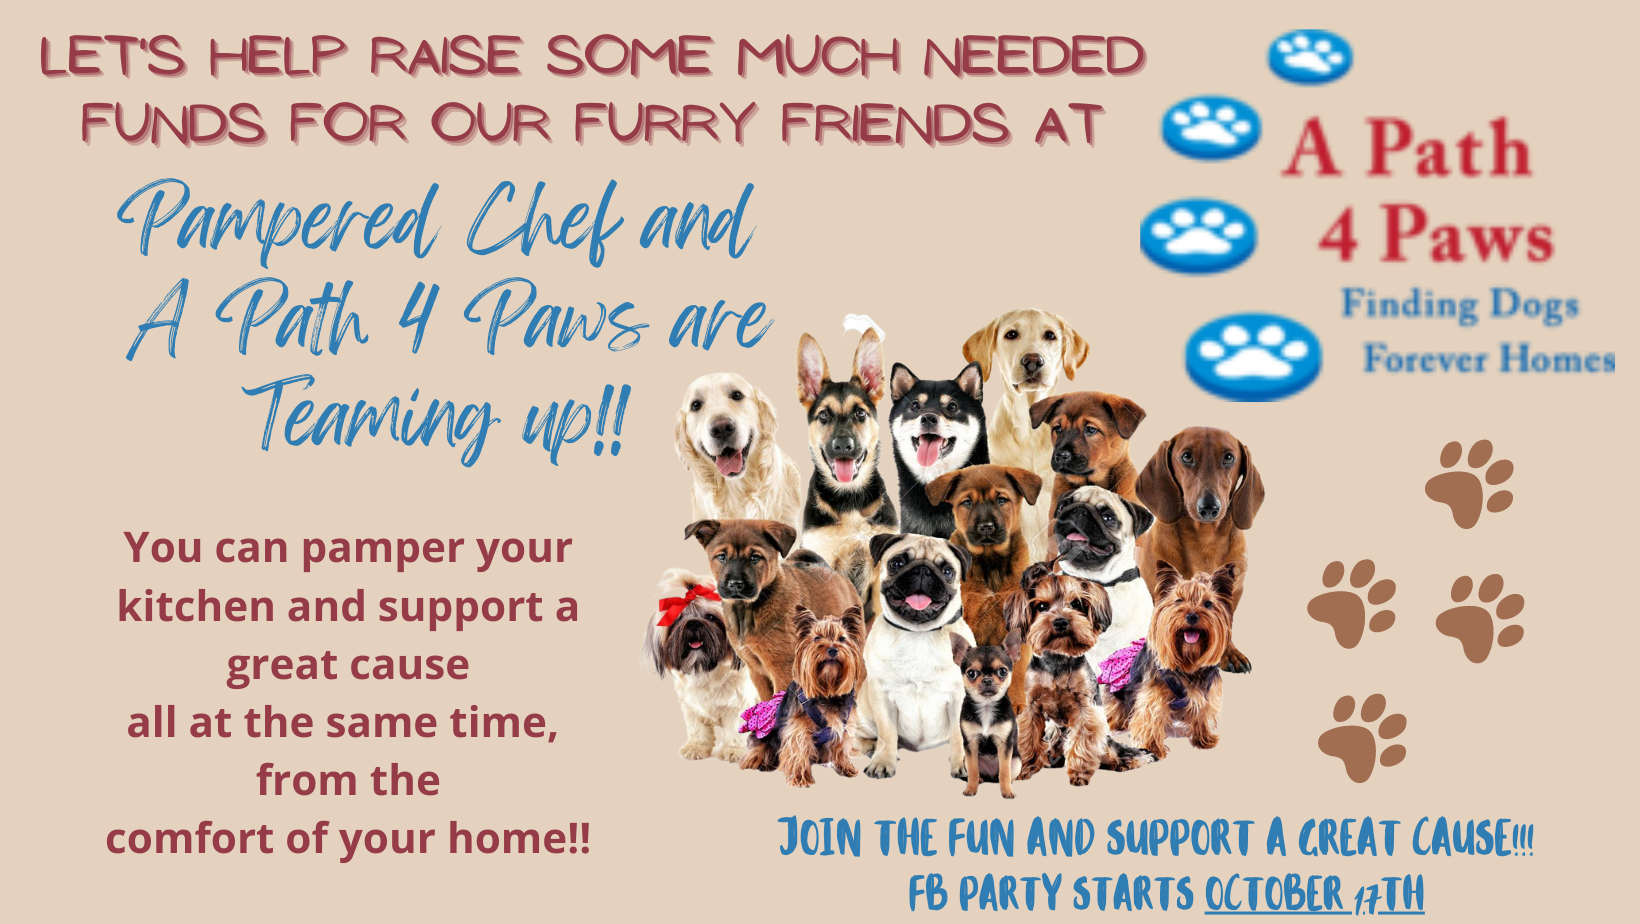 You can pamper your kitchen and support a great cause all at the same time, from the comfort of your home!!